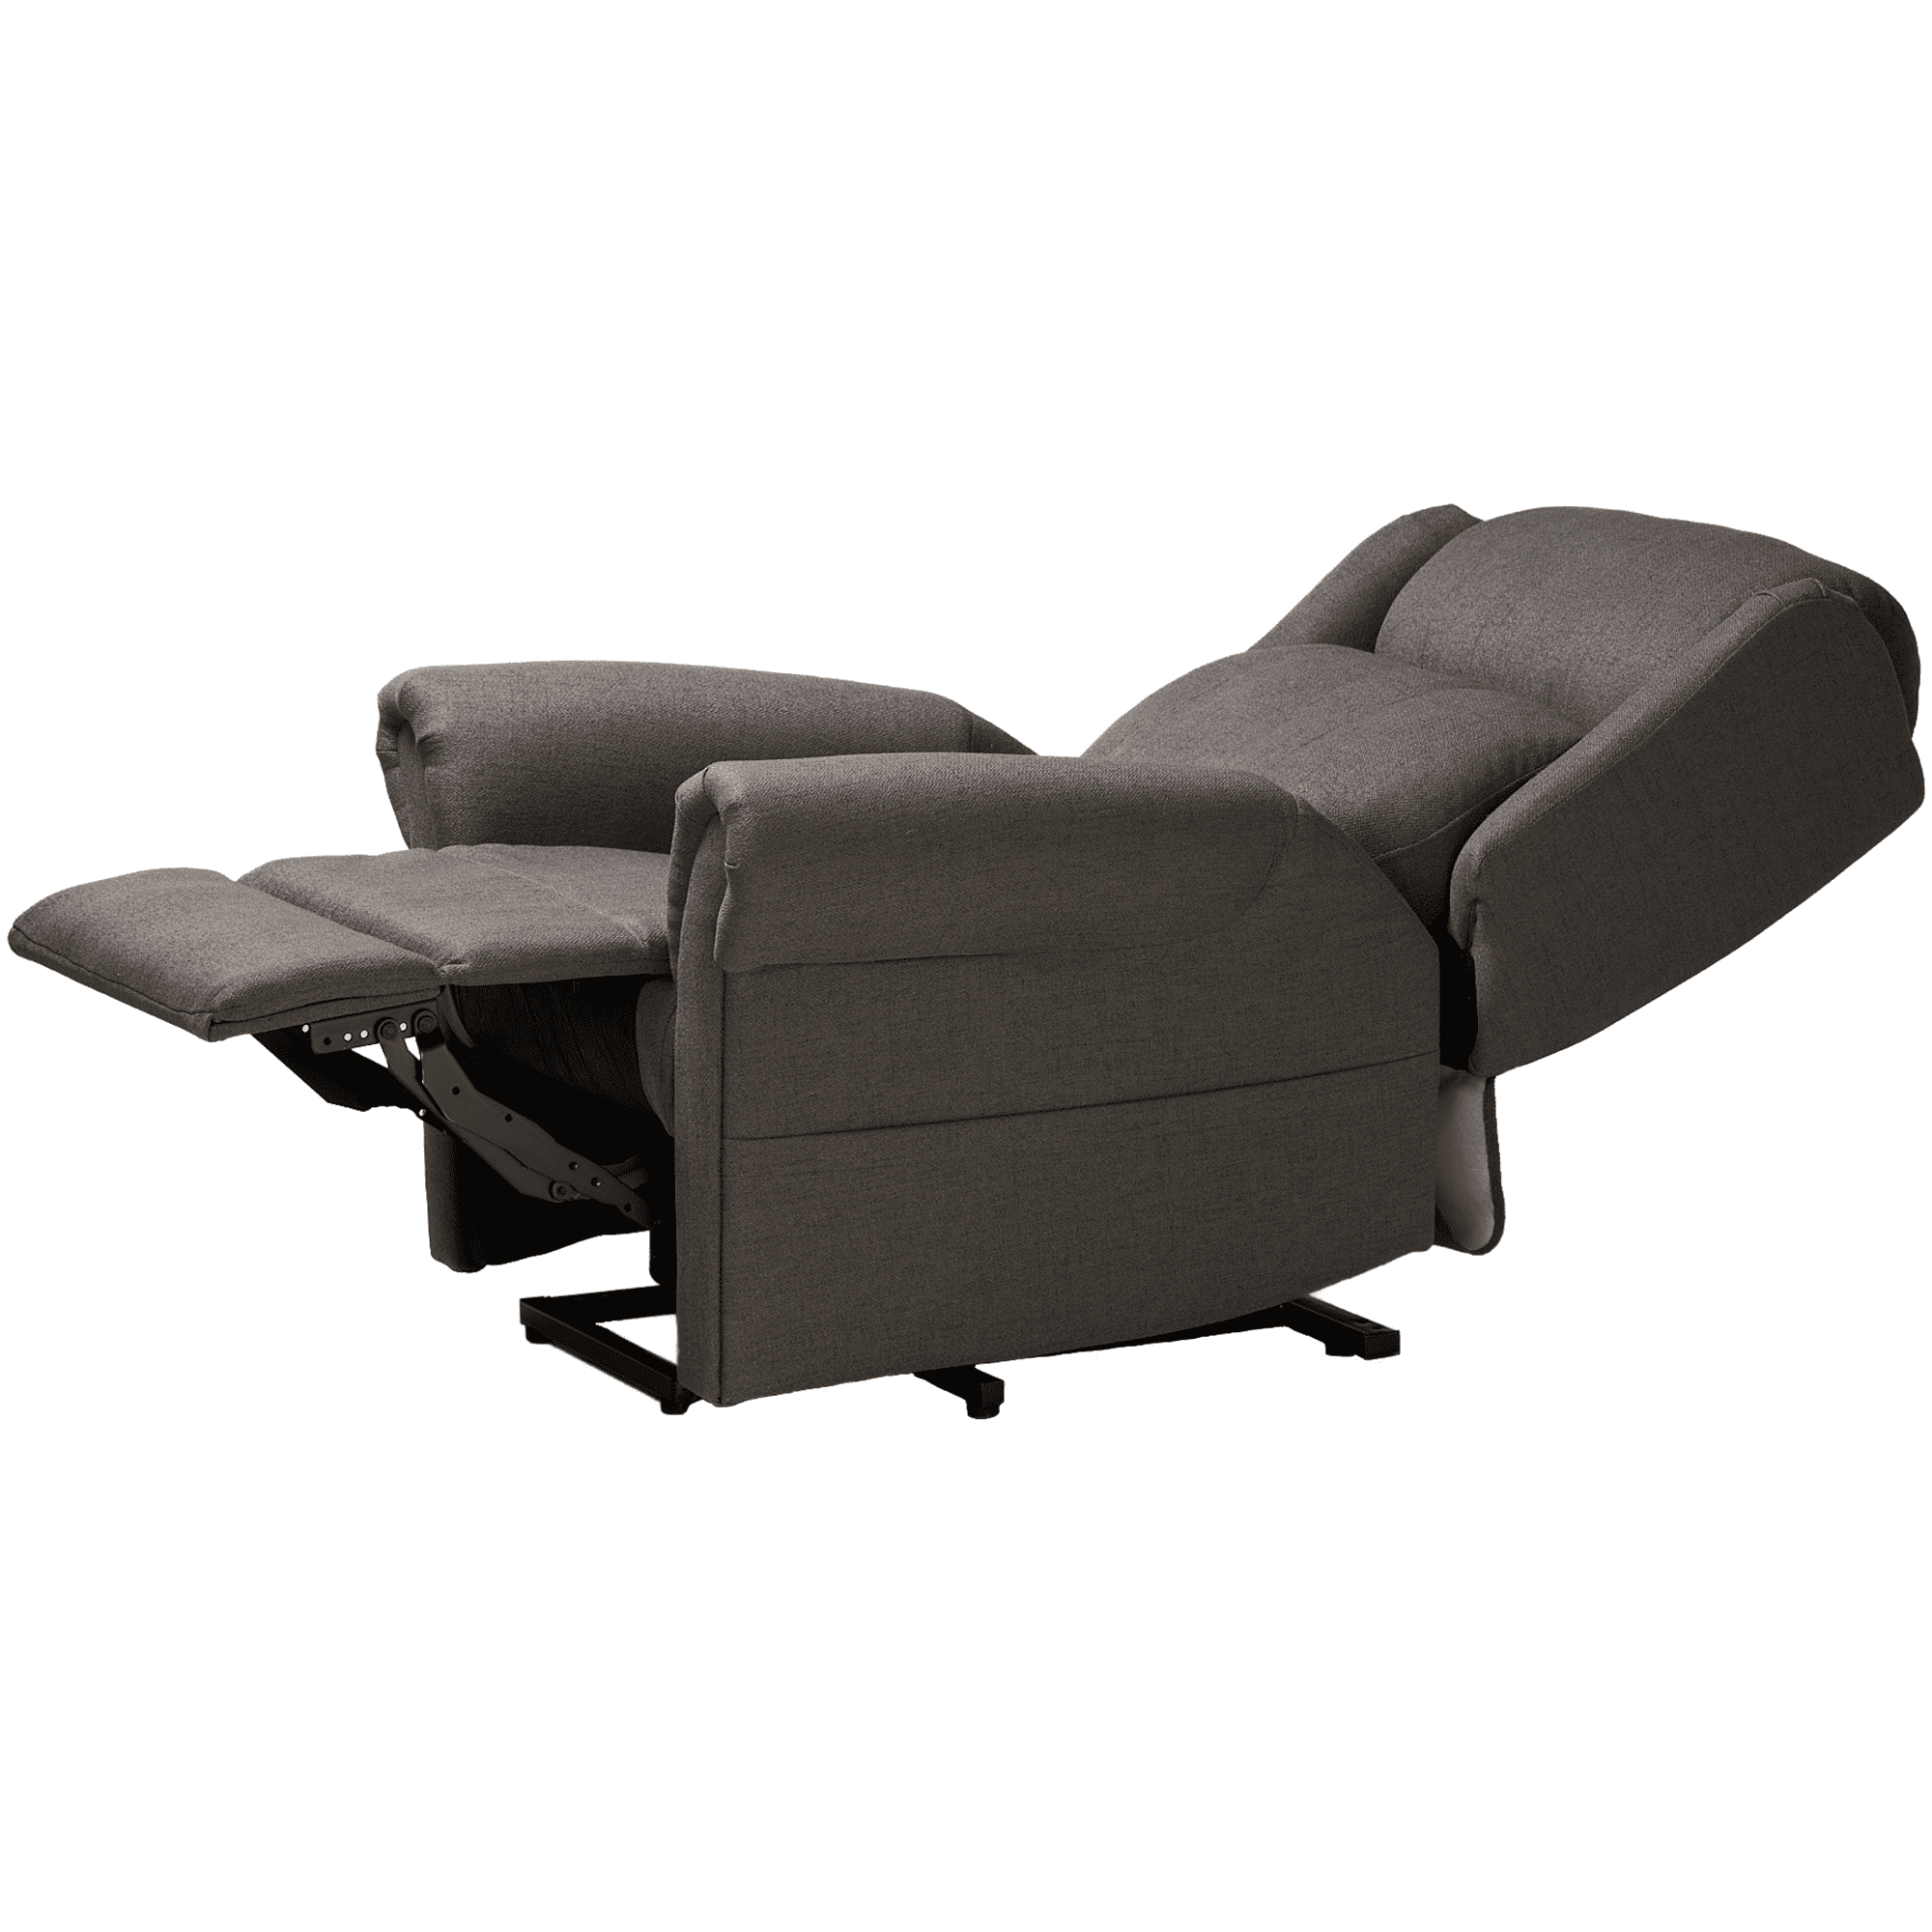 SonderCare Essence Lift Chair Product Page Sleep Position Featured (1)